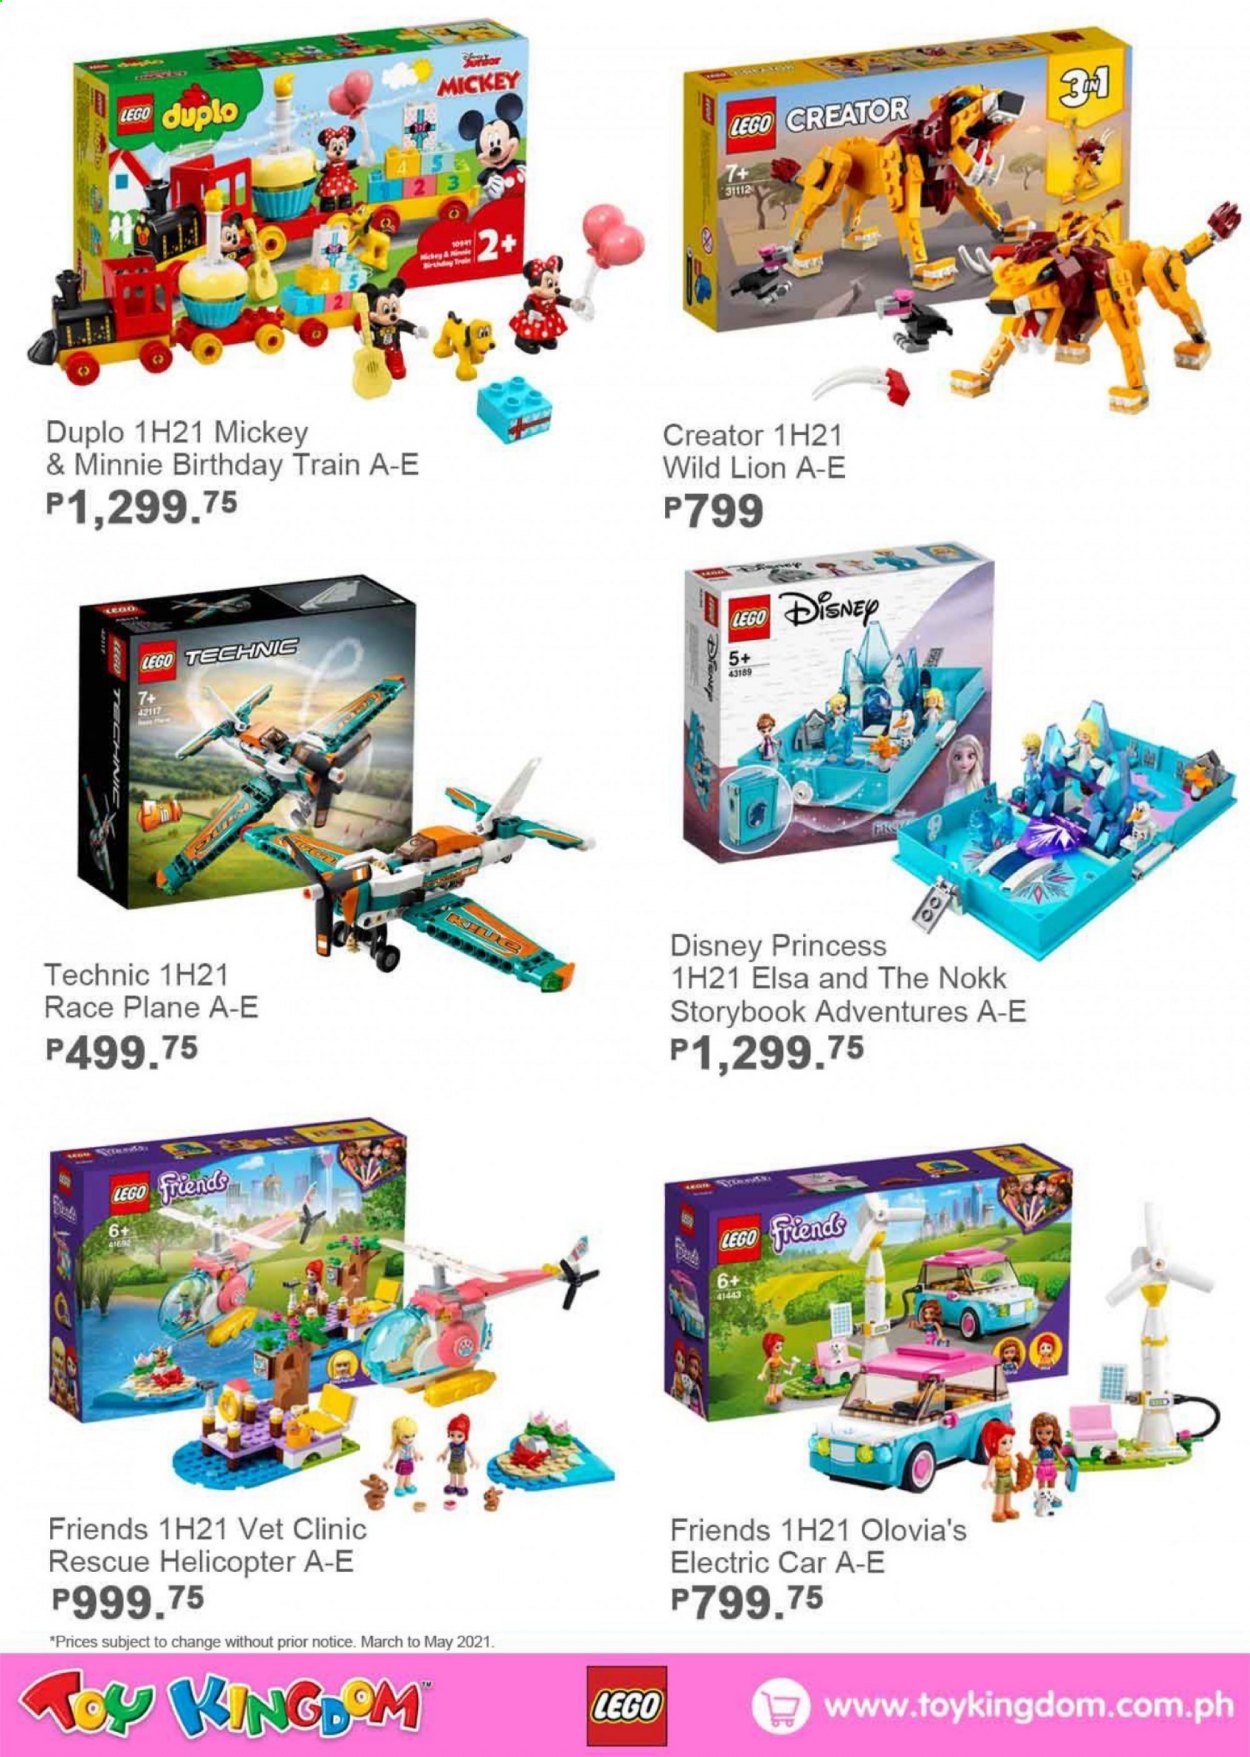 thumbnail - Toy Kingdom offer  - Sales products - Disney, Mickey Mouse, Minnie Mouse, LEGO, LEGO Creator, LEGO Duplo, LEGO Friends, train, helicopter, princess, LEGO Technic, clinic rescue helicopter. Page 75.